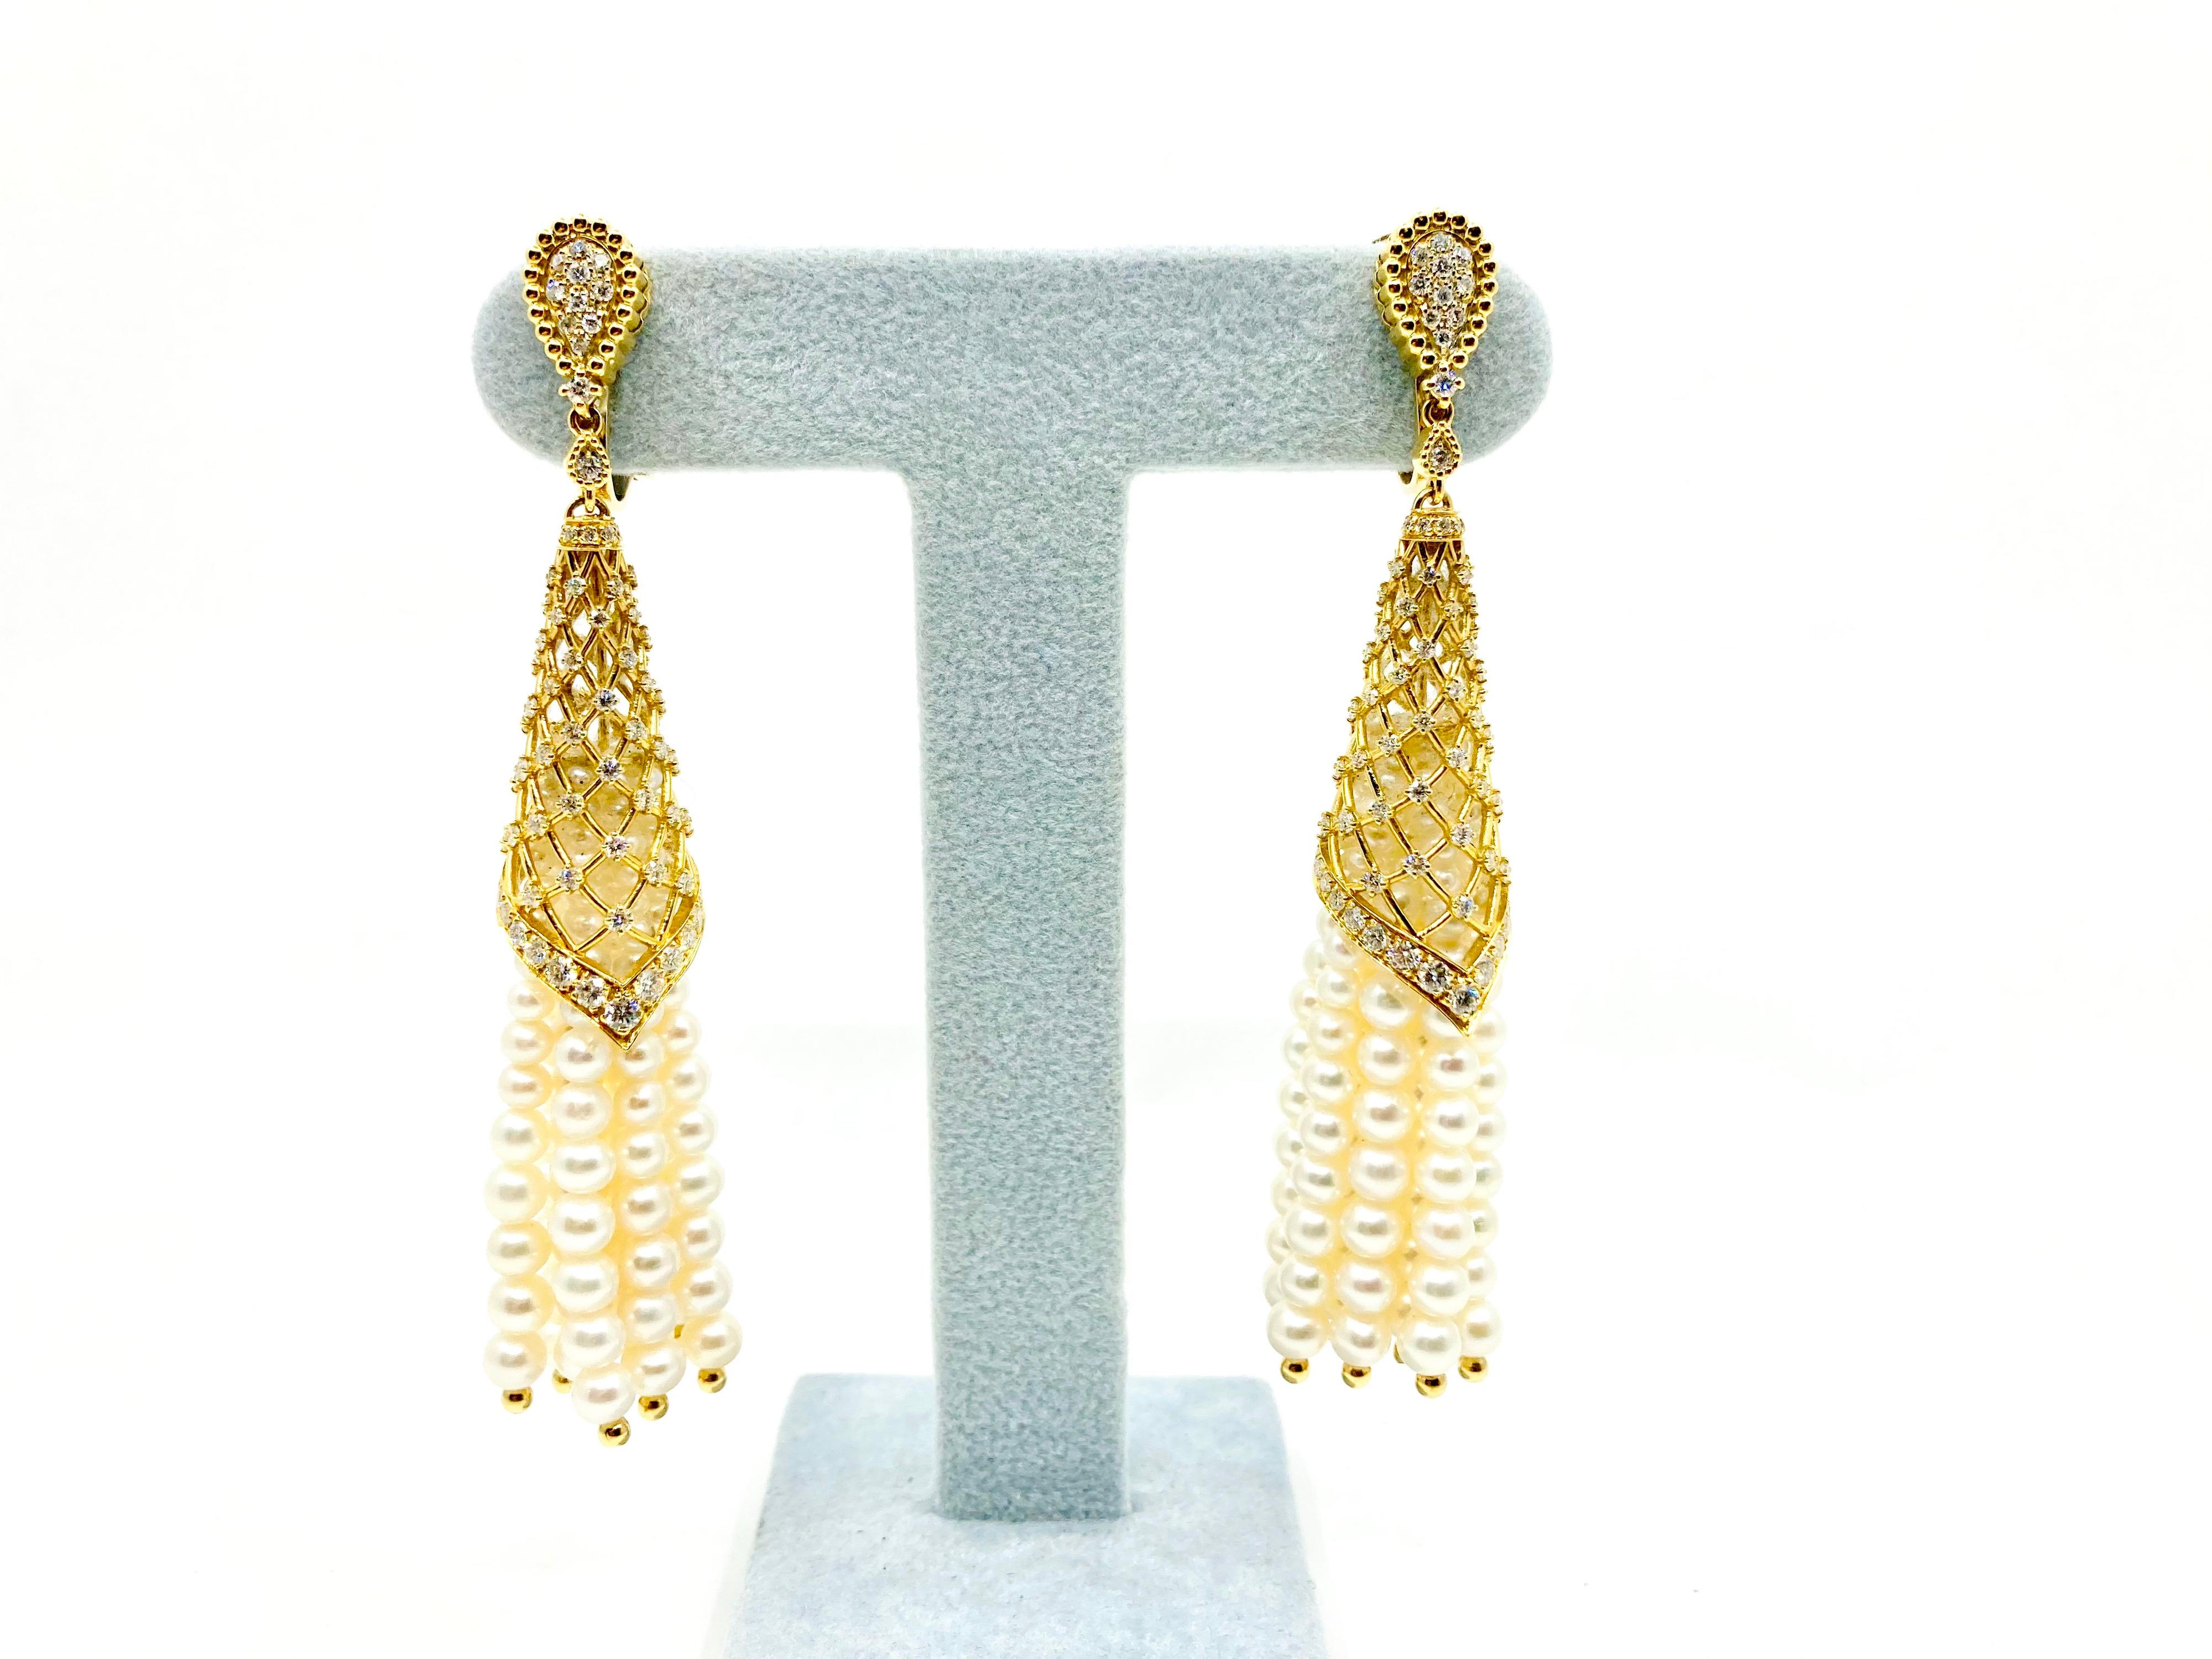 Timeless fine Yellow Gold earrings, with Pearls and Diamonds ct. 2.08, Made in Italy by Roberto Casarin. 

Inspired by the sea and its heritage, this fine earrings embrace a concept natural concept with a remarkable elegant timeless design, two main